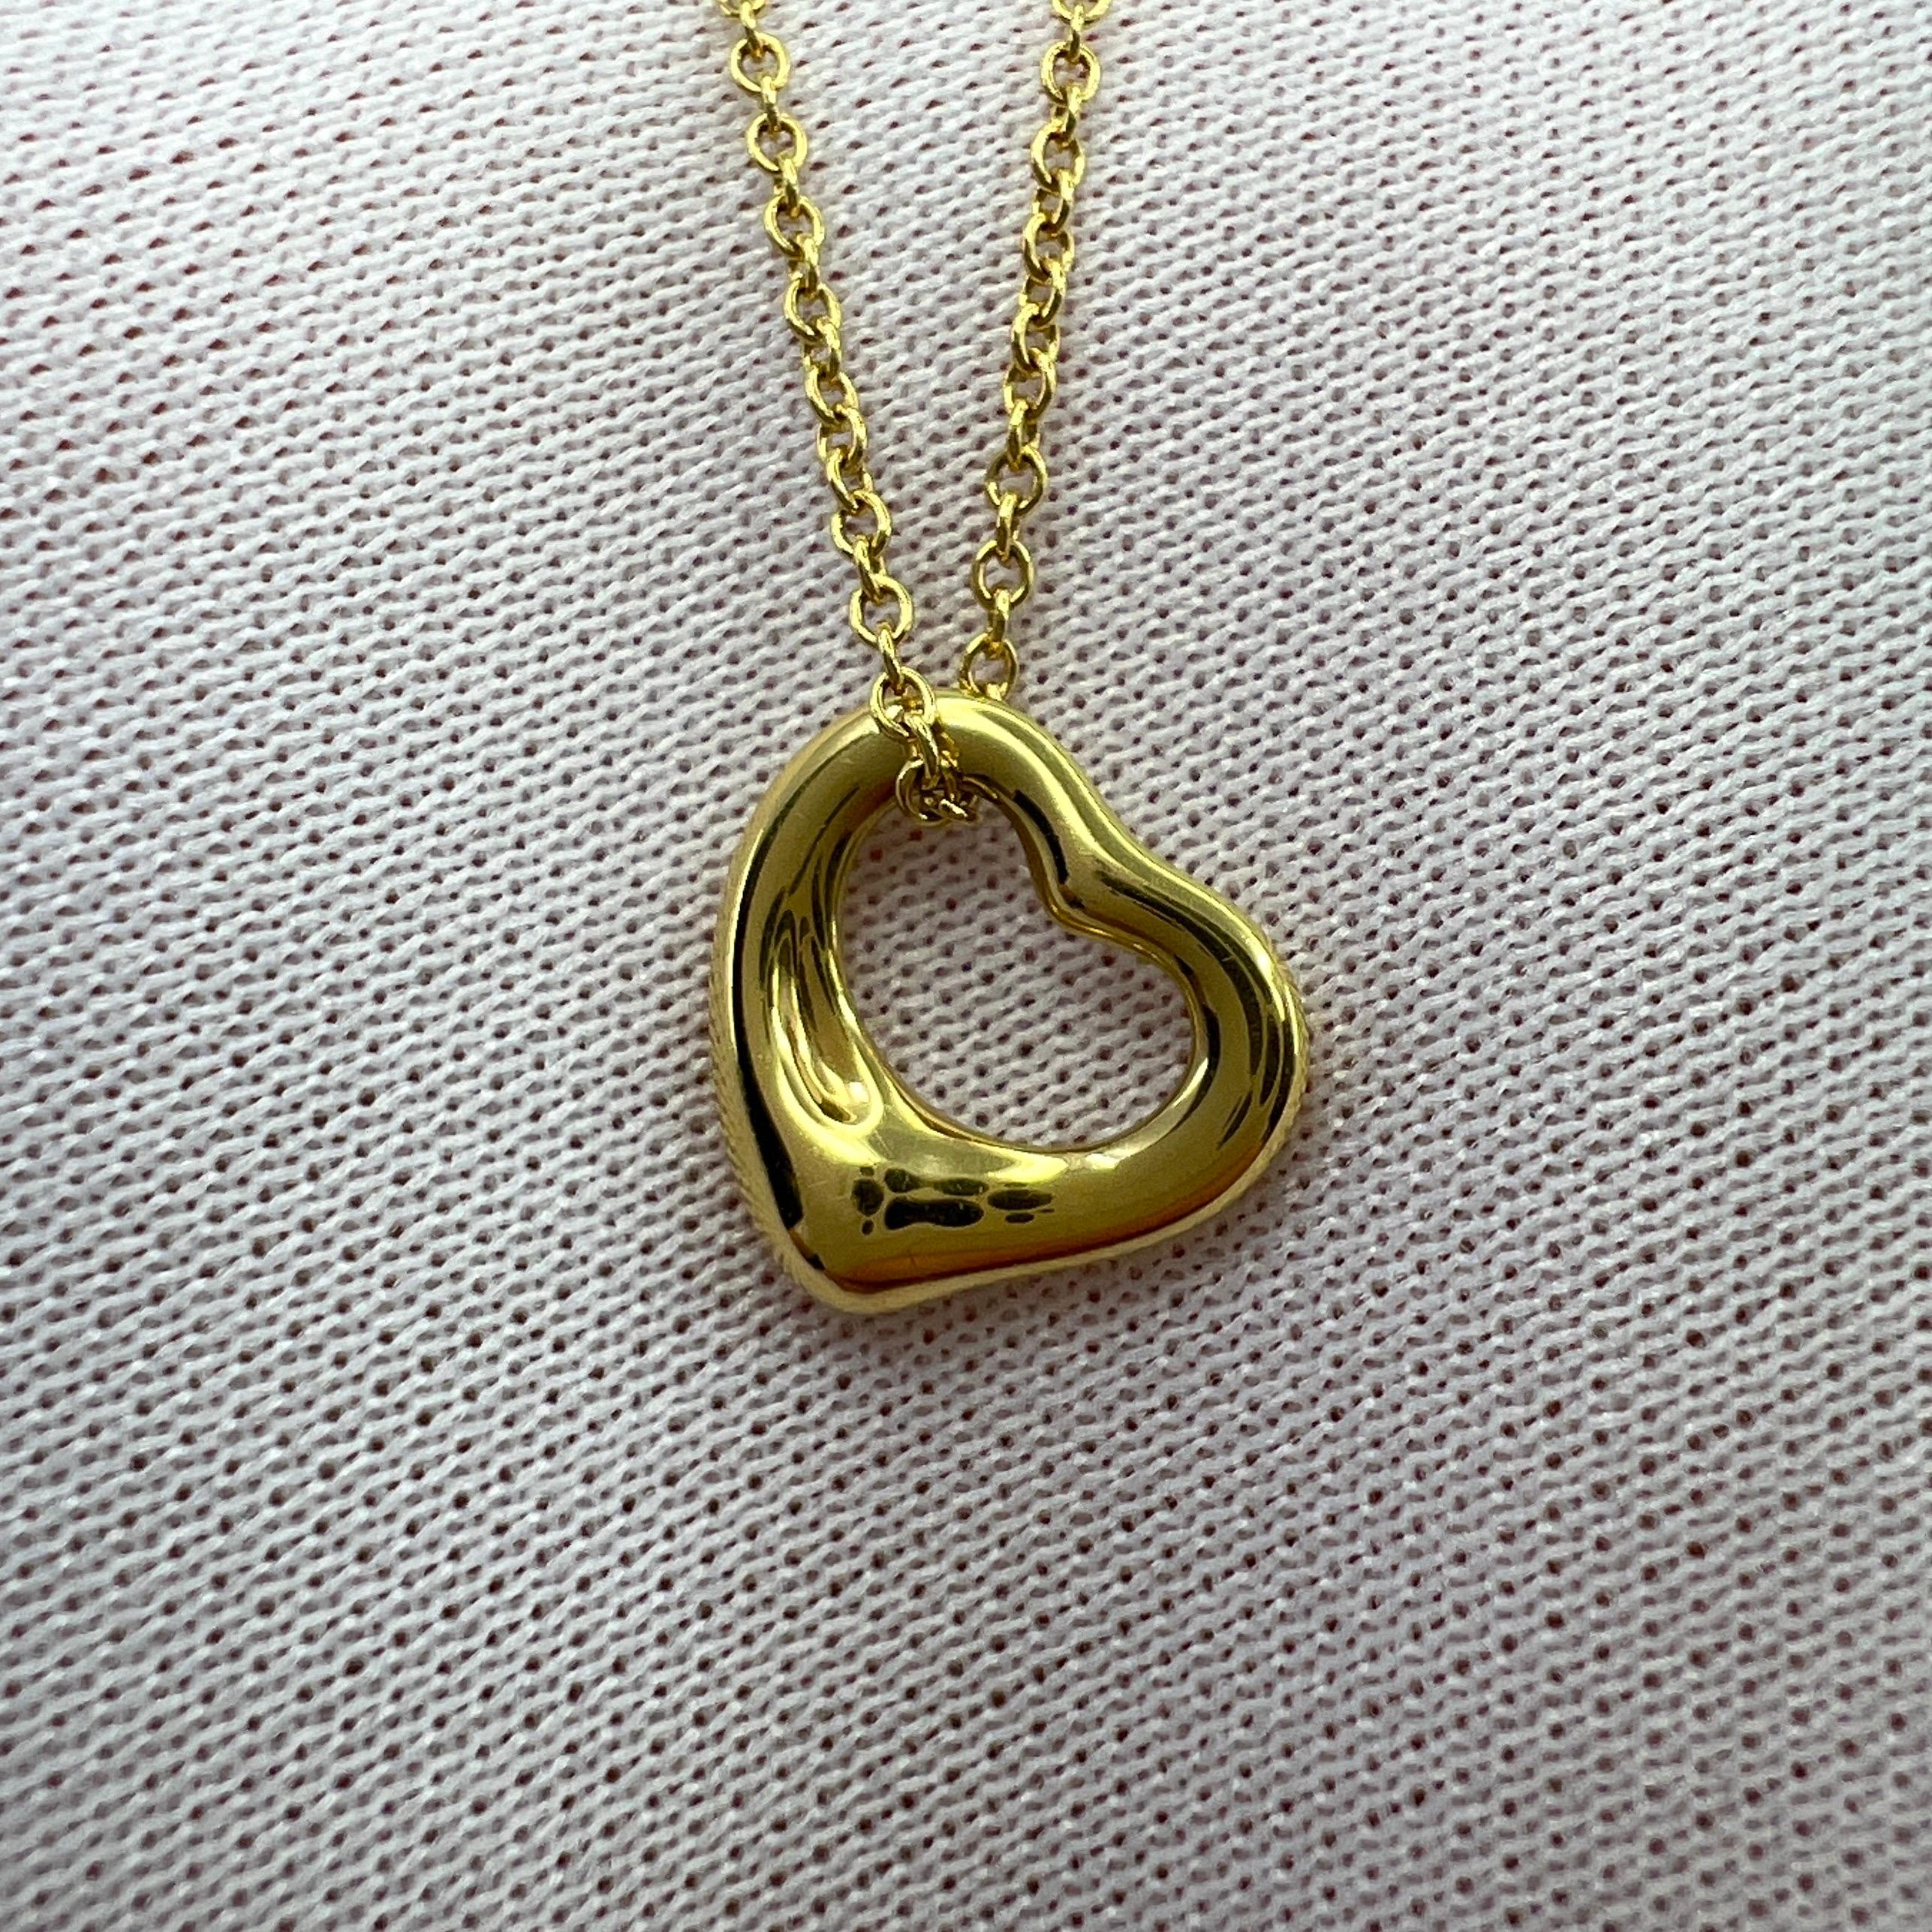 Vintage Tiffany & Co. Elsa Peretti Open Heart 18k Gold Pendant Necklace 15mm In Excellent Condition For Sale In Birmingham, GB